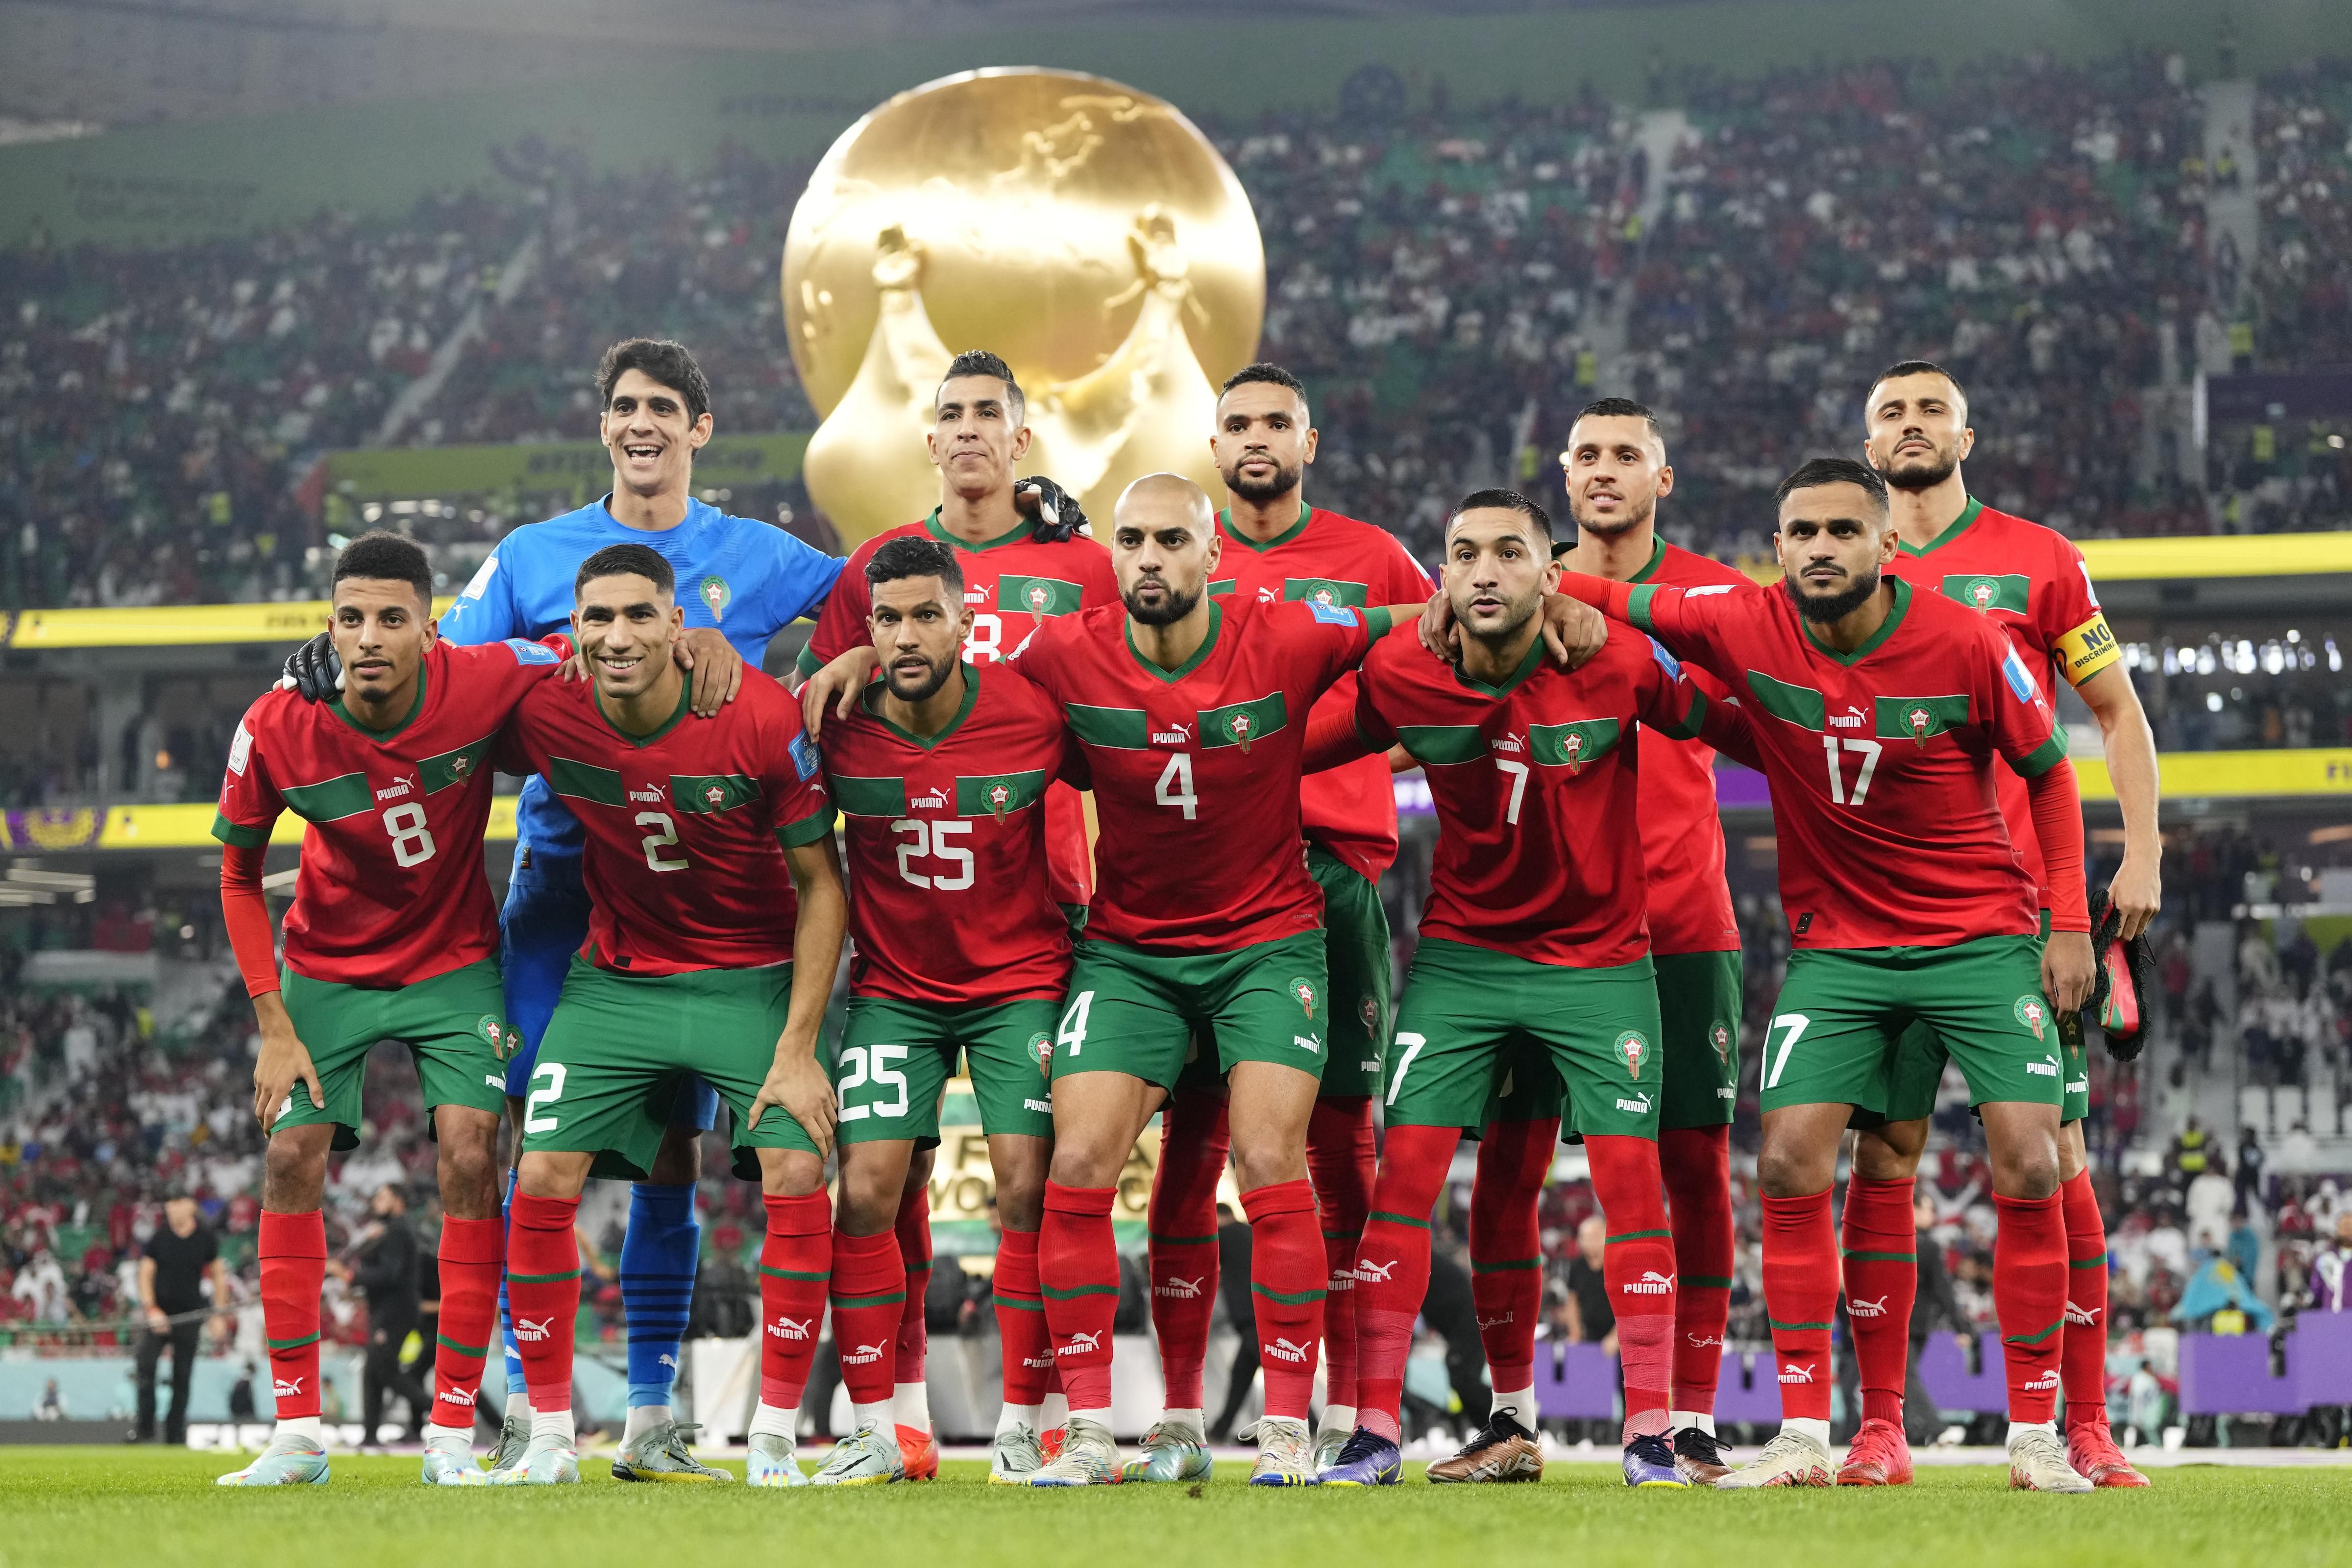 Morocco line-up during the 2022 FIFA World Cup quarterfinal match against Portugal in Doha, Qatar.